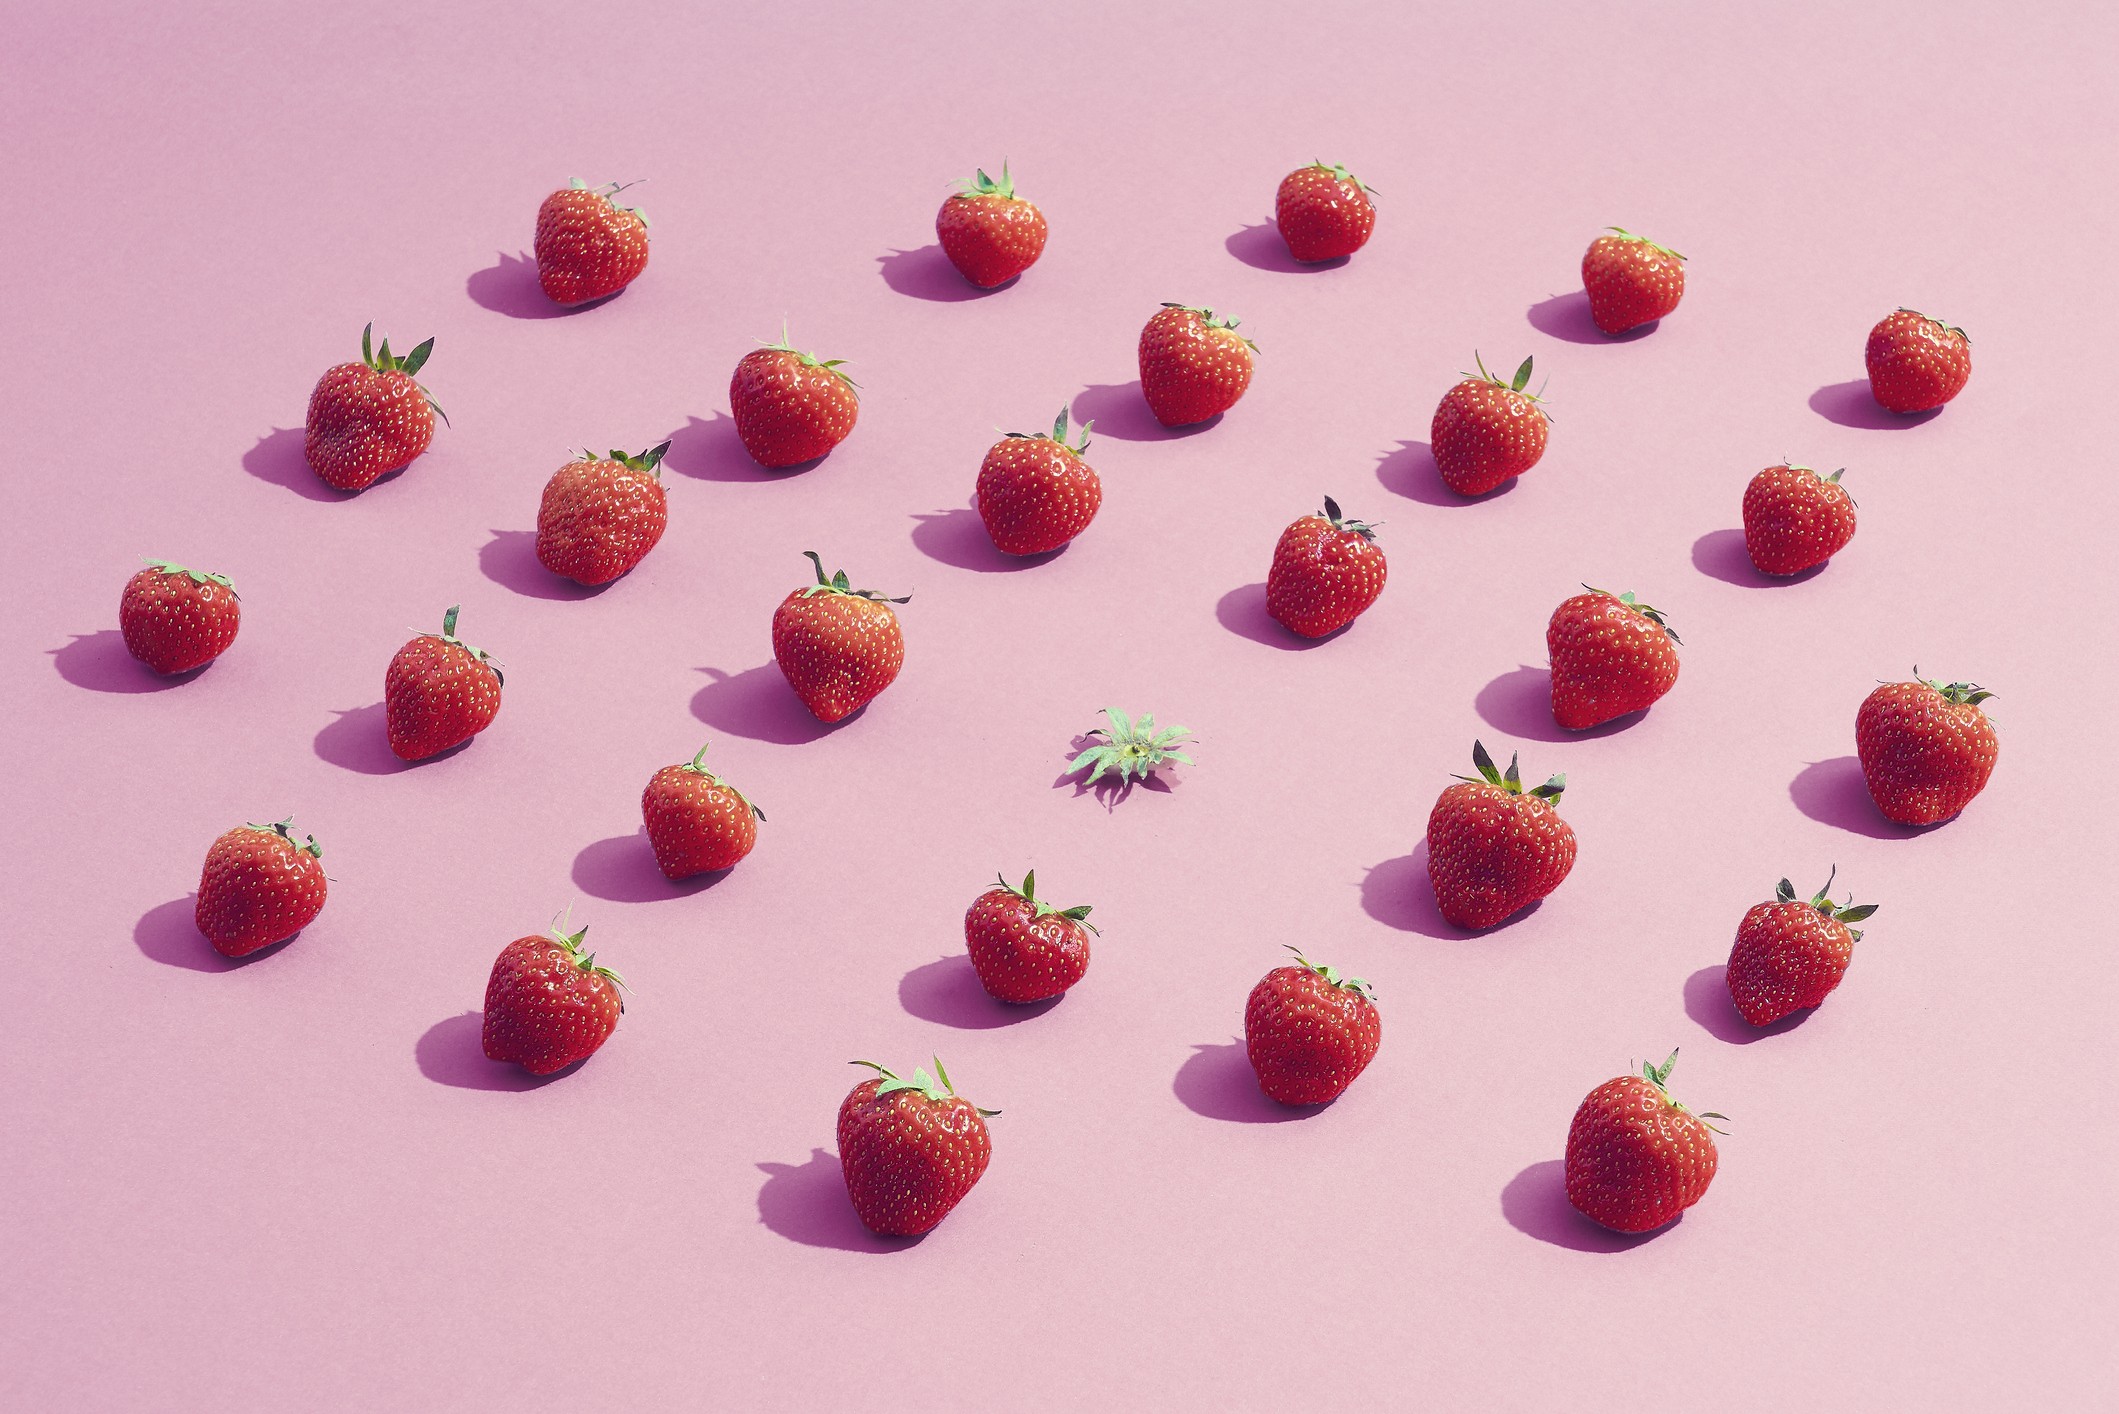 A group of strawberries surrounding an eaten one that stands out from the crowd (Foto: Getty Images)